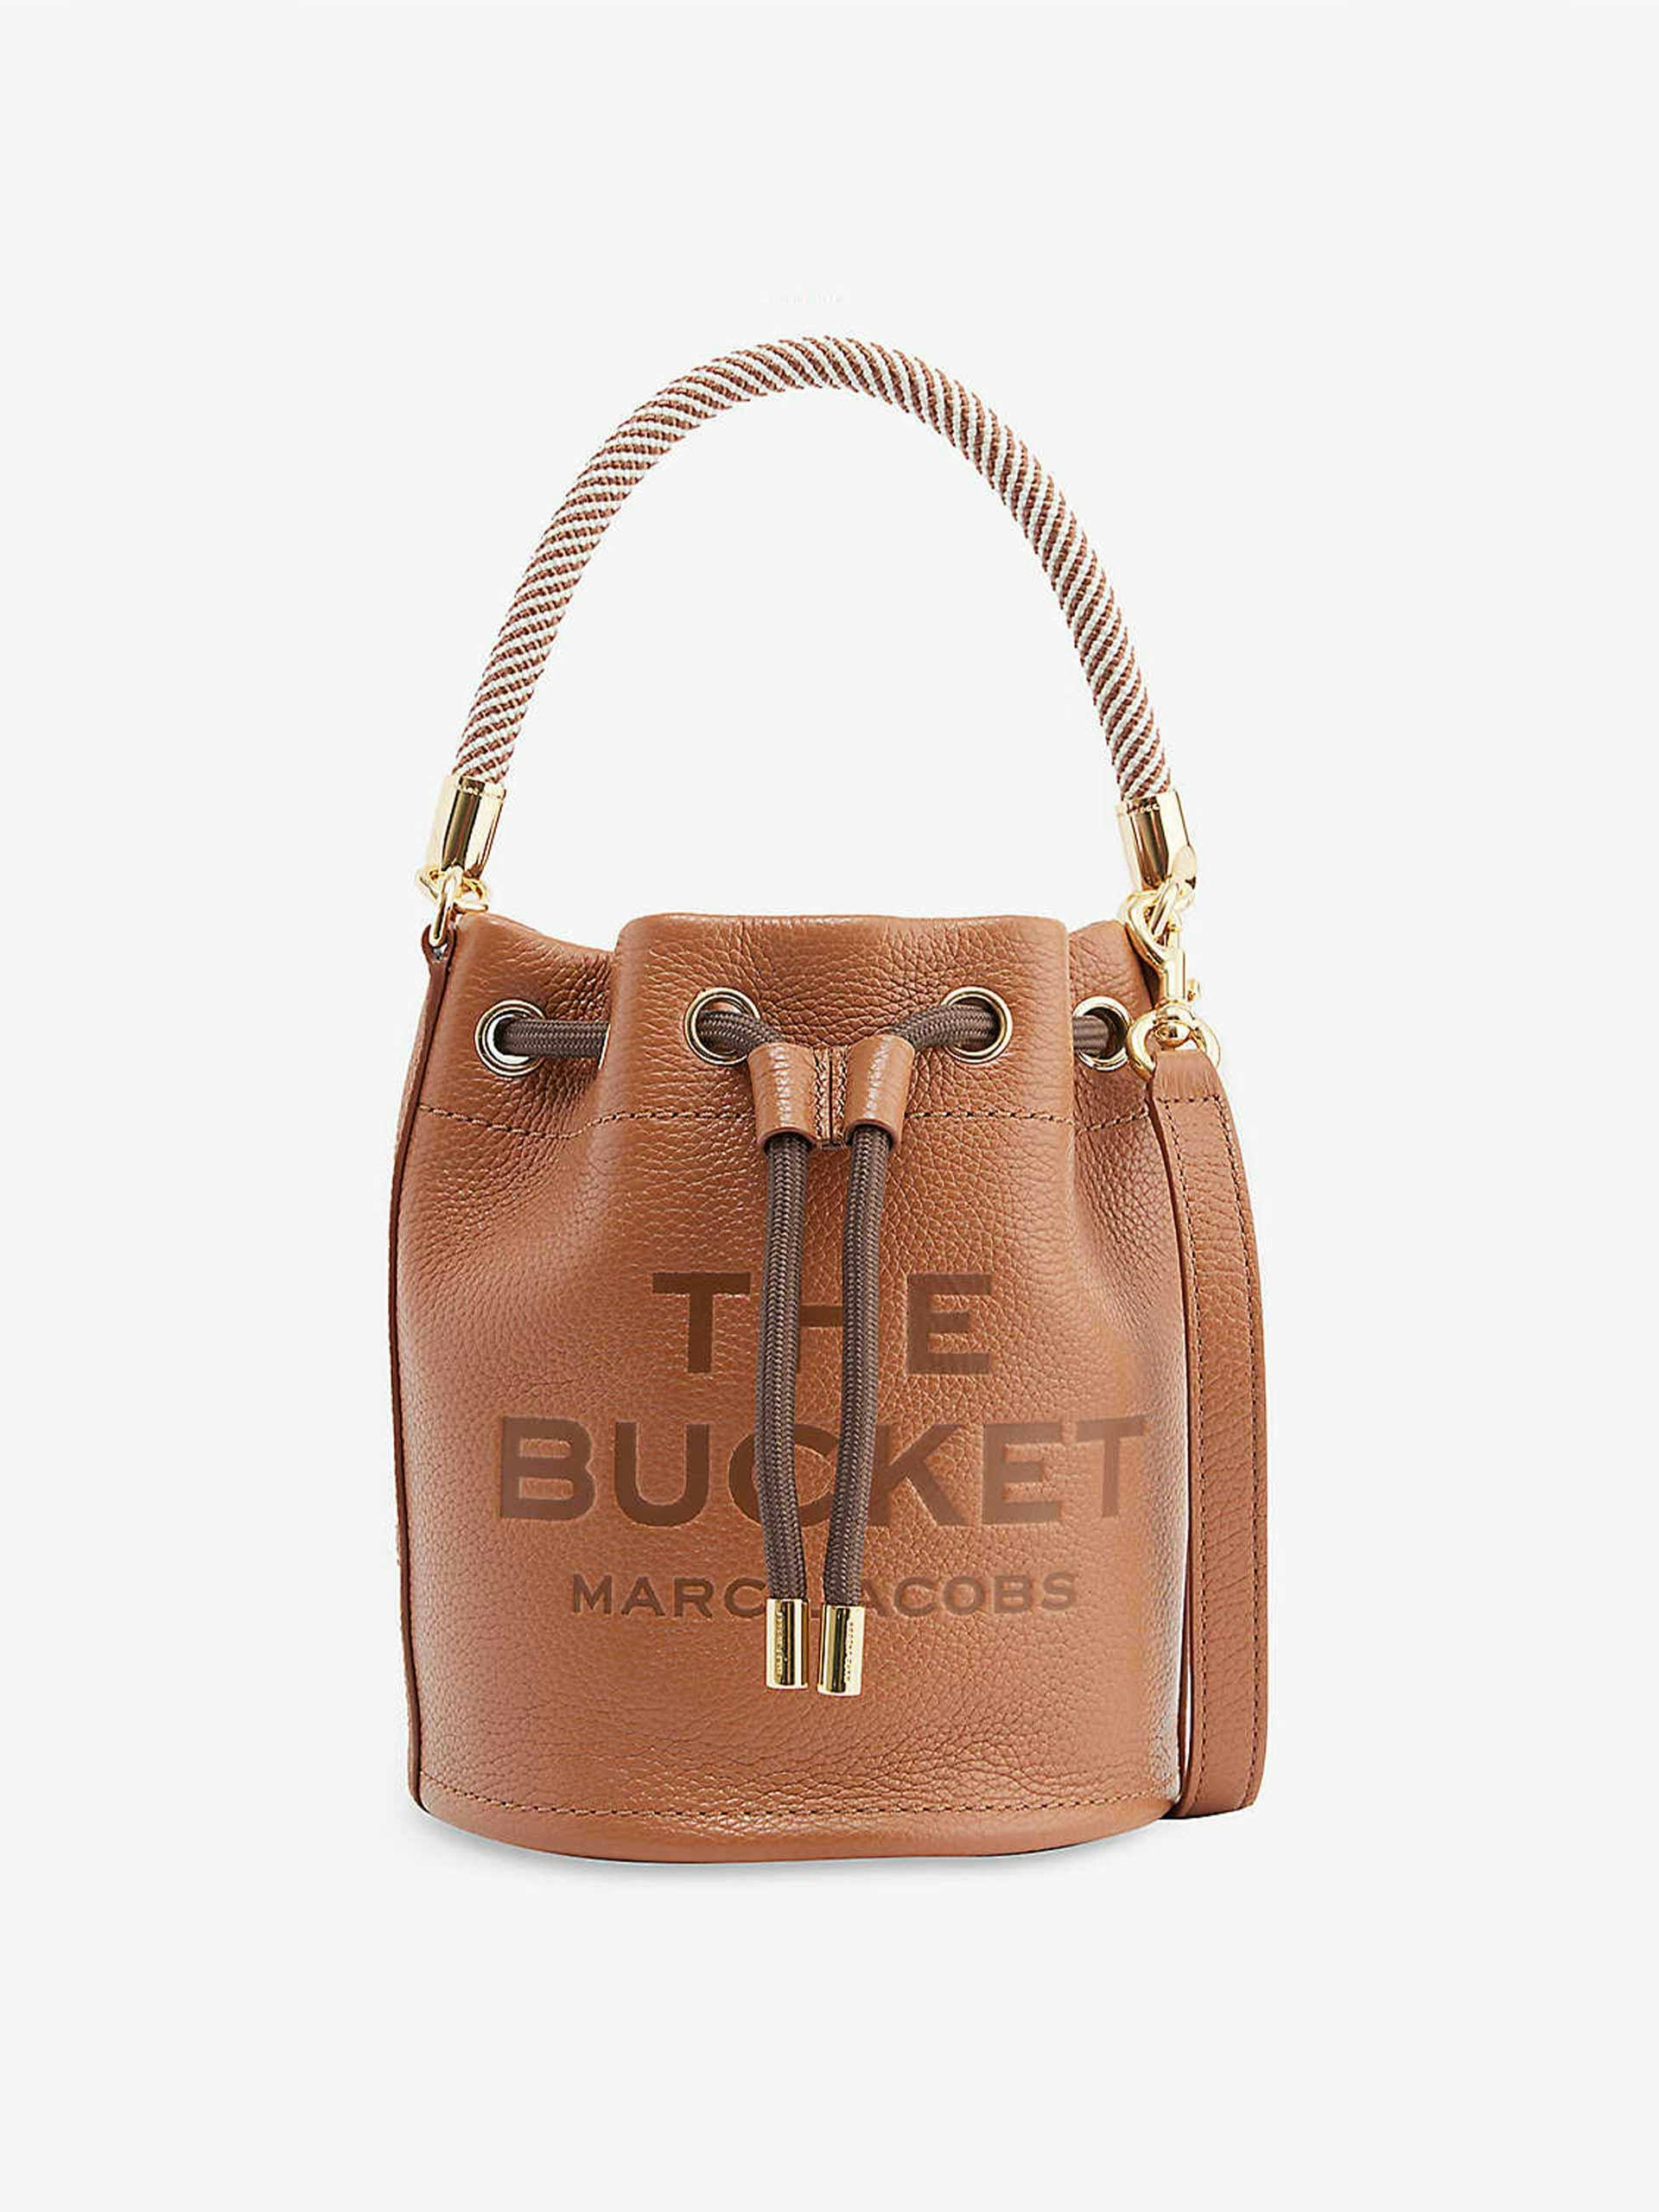 The Bucket leather drawstring bag